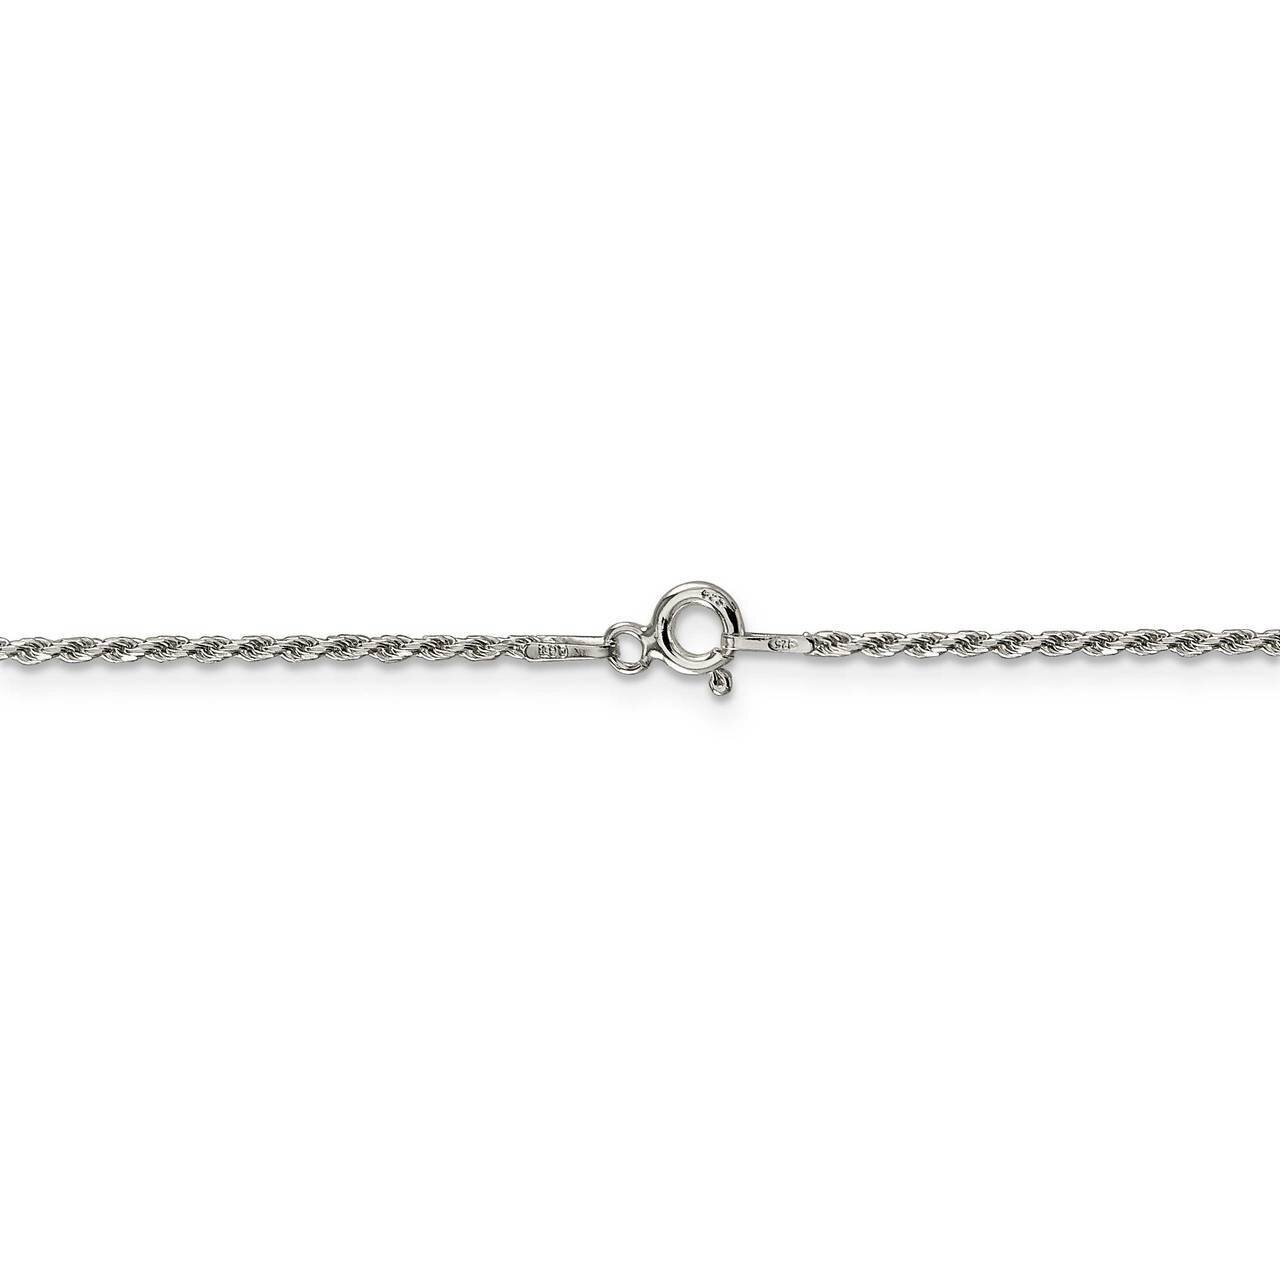 26 Inch 1.5mm Diamond-cut Rope Chain Sterling Silver QDC020-26